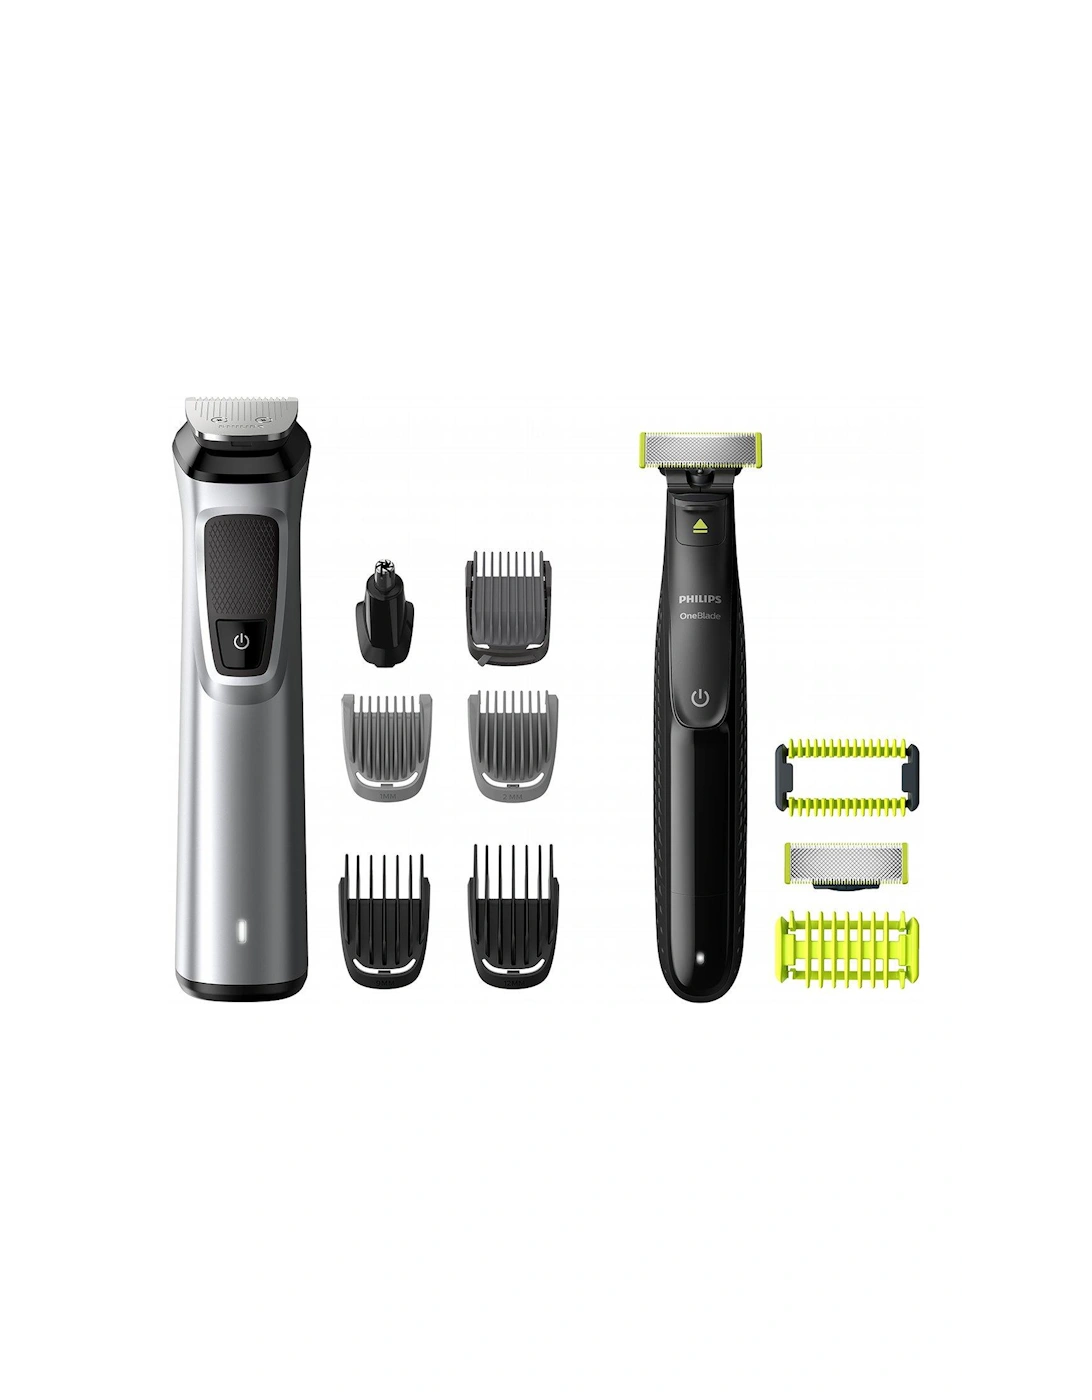 Series 9000 12-in-1 Multi Grooming Kit for Face, Hair and Body with OneBlade Bundle MG9710/93, 2 of 1